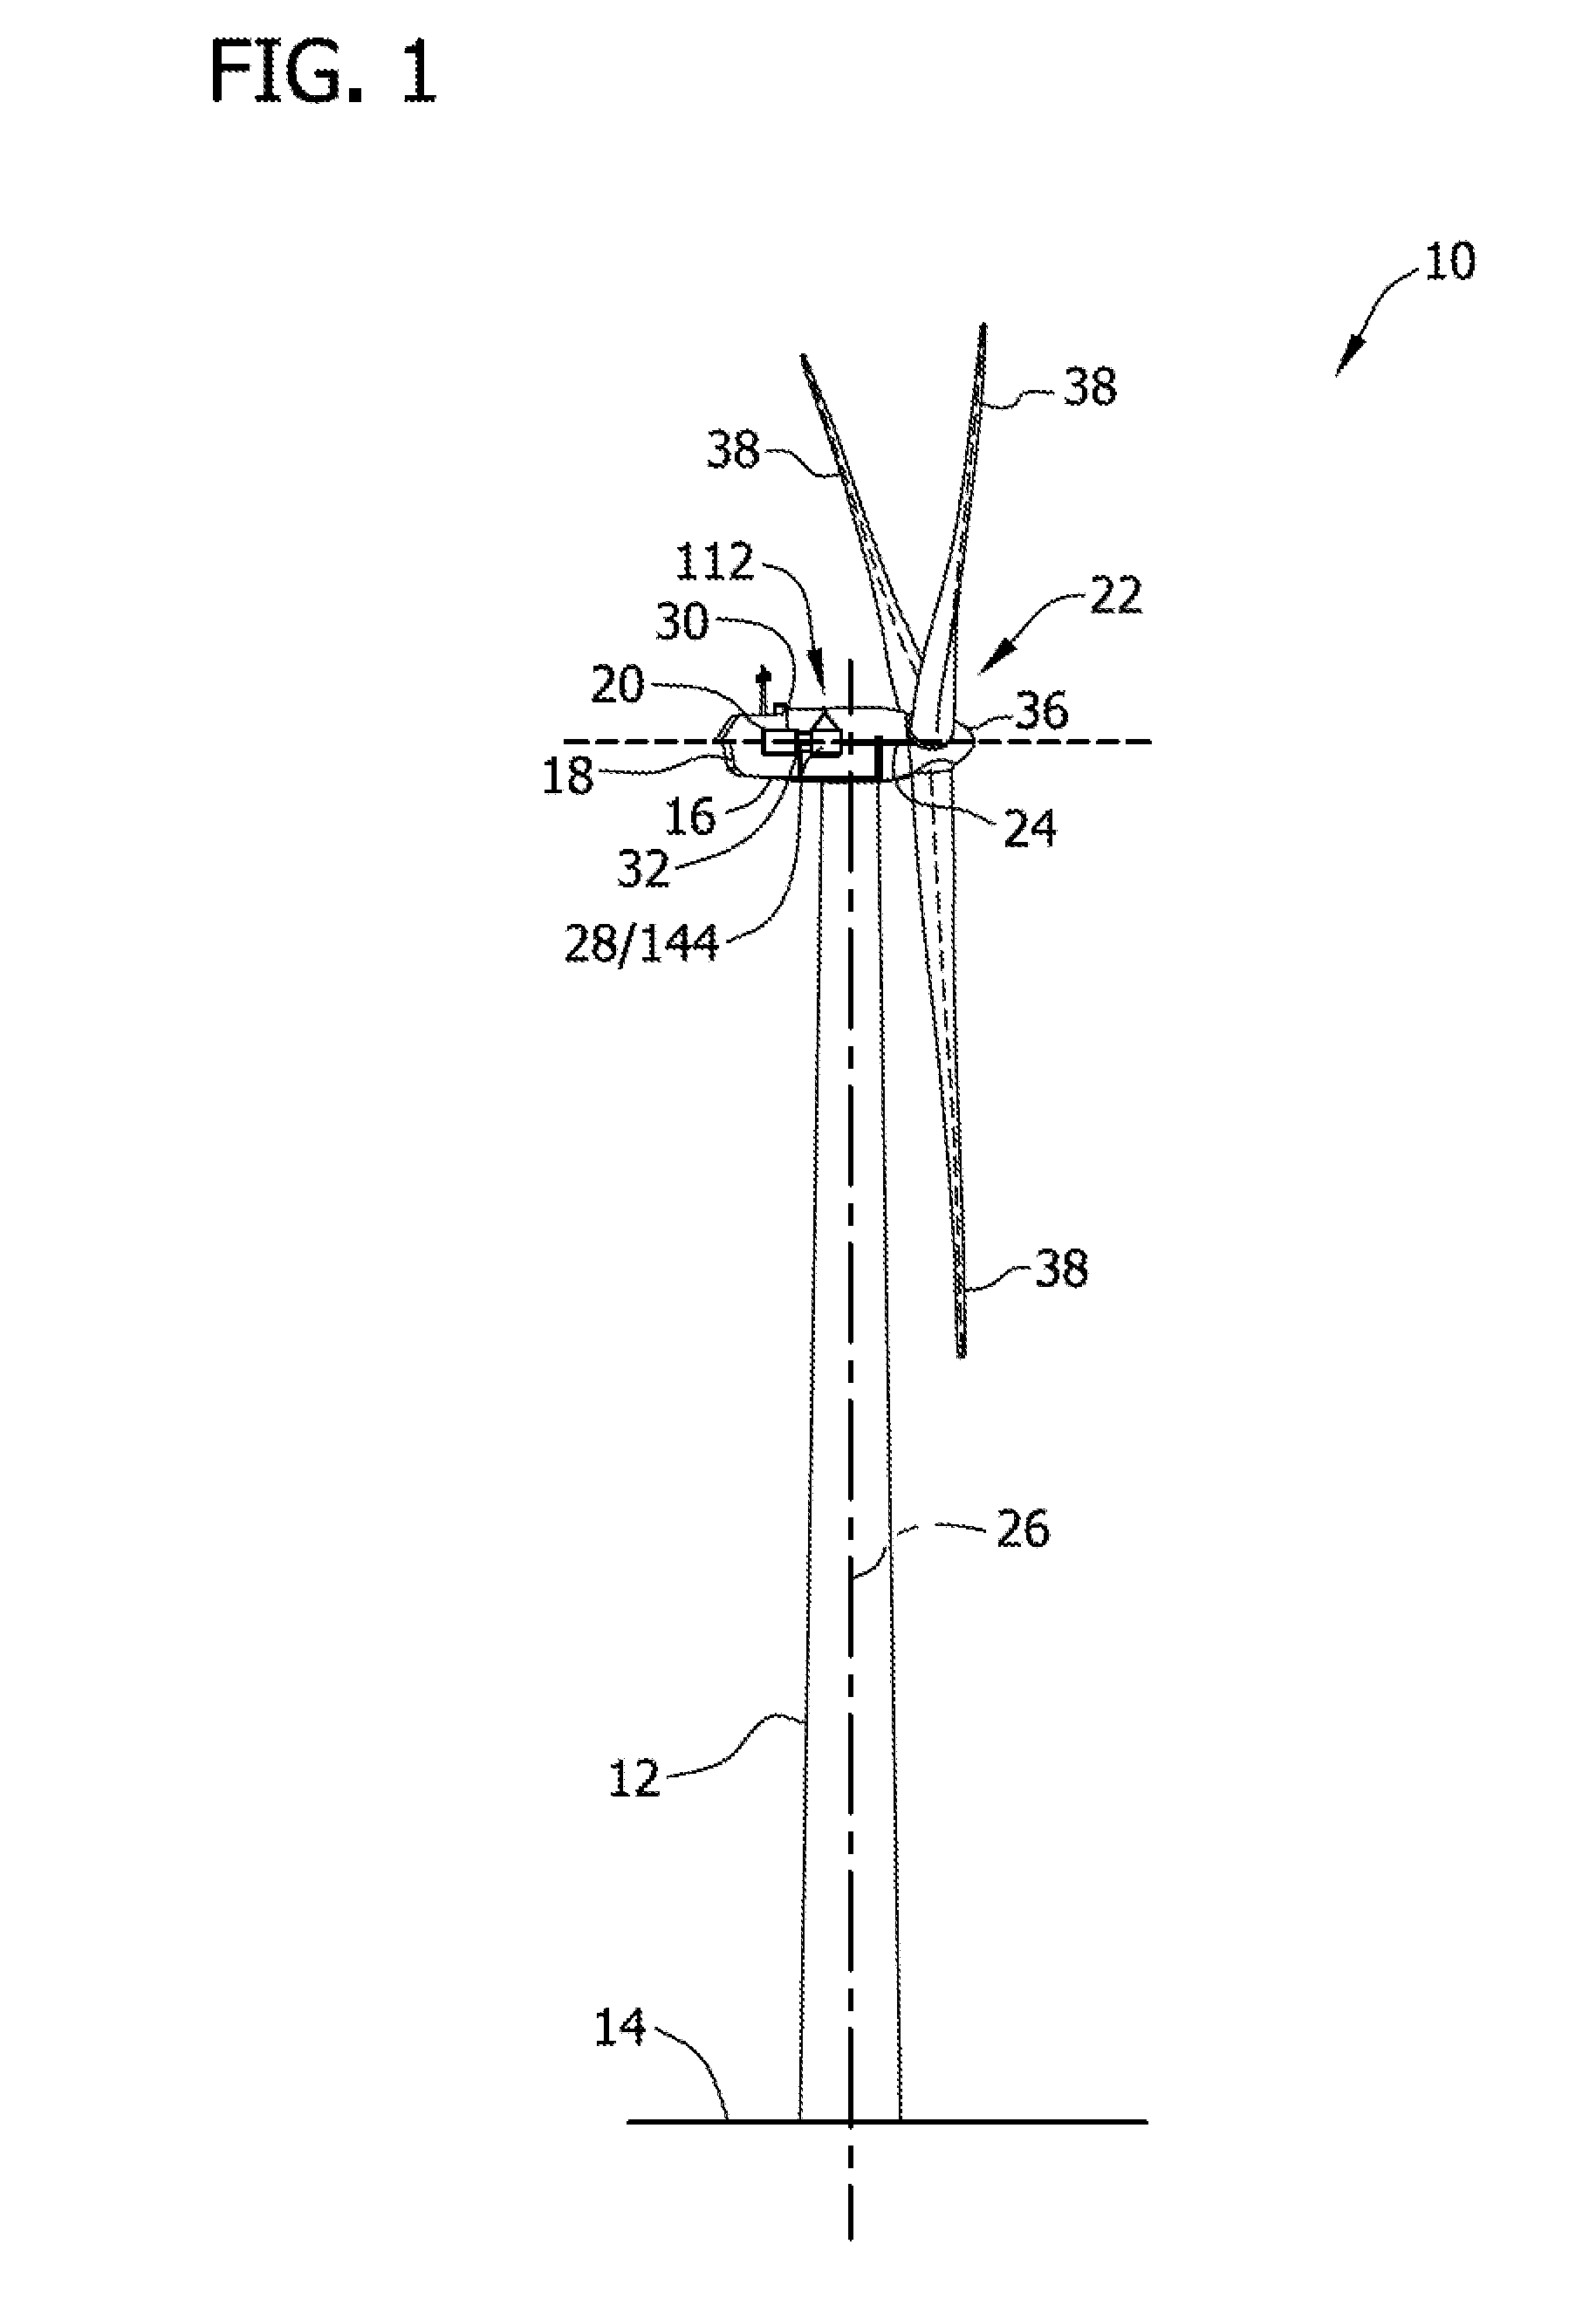 Component handling system for use in wind turbines and methods of positioning a drive train component